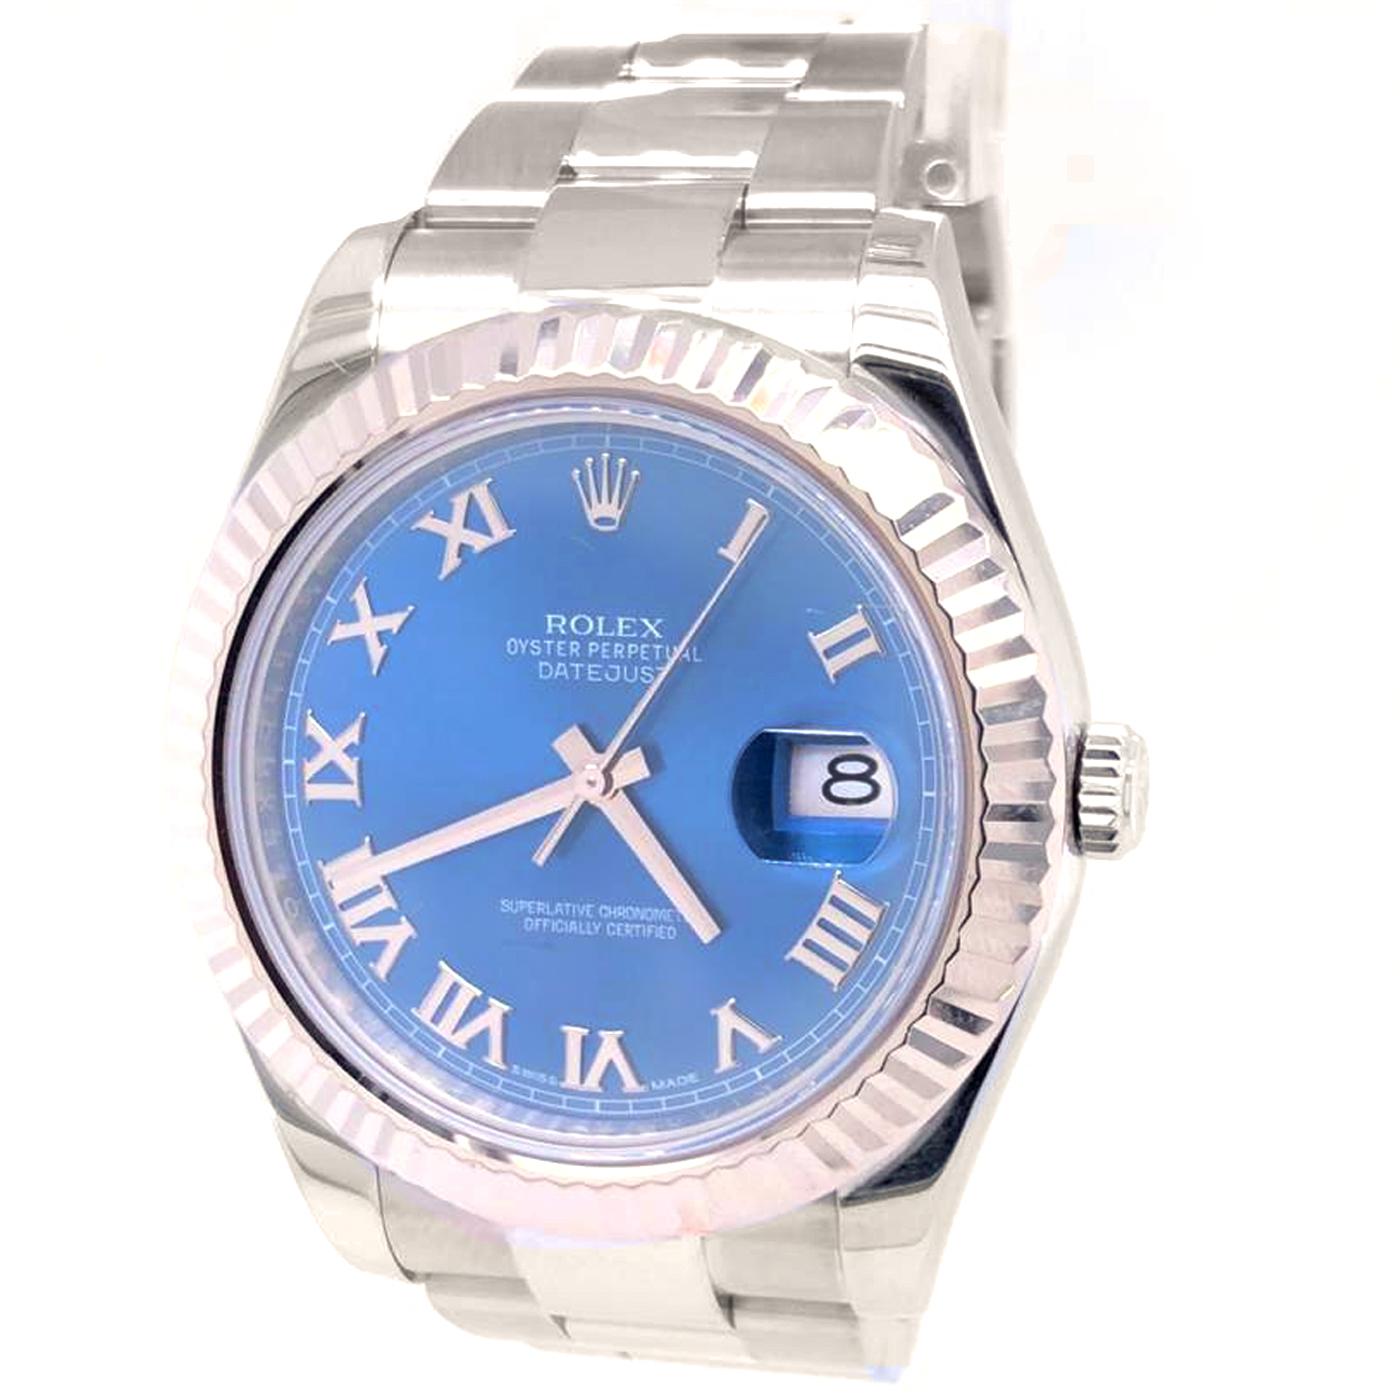 Rolex Datejust 41 Steel White Gold Blue Dial Men's Watch 116334 Box Card. Officially certified chronometer automatic self-winding movement. Stainless steel case 41 mm in diameter. Rolex logo on a crown. 18K white gold fluted bezel. Scratch-resistant